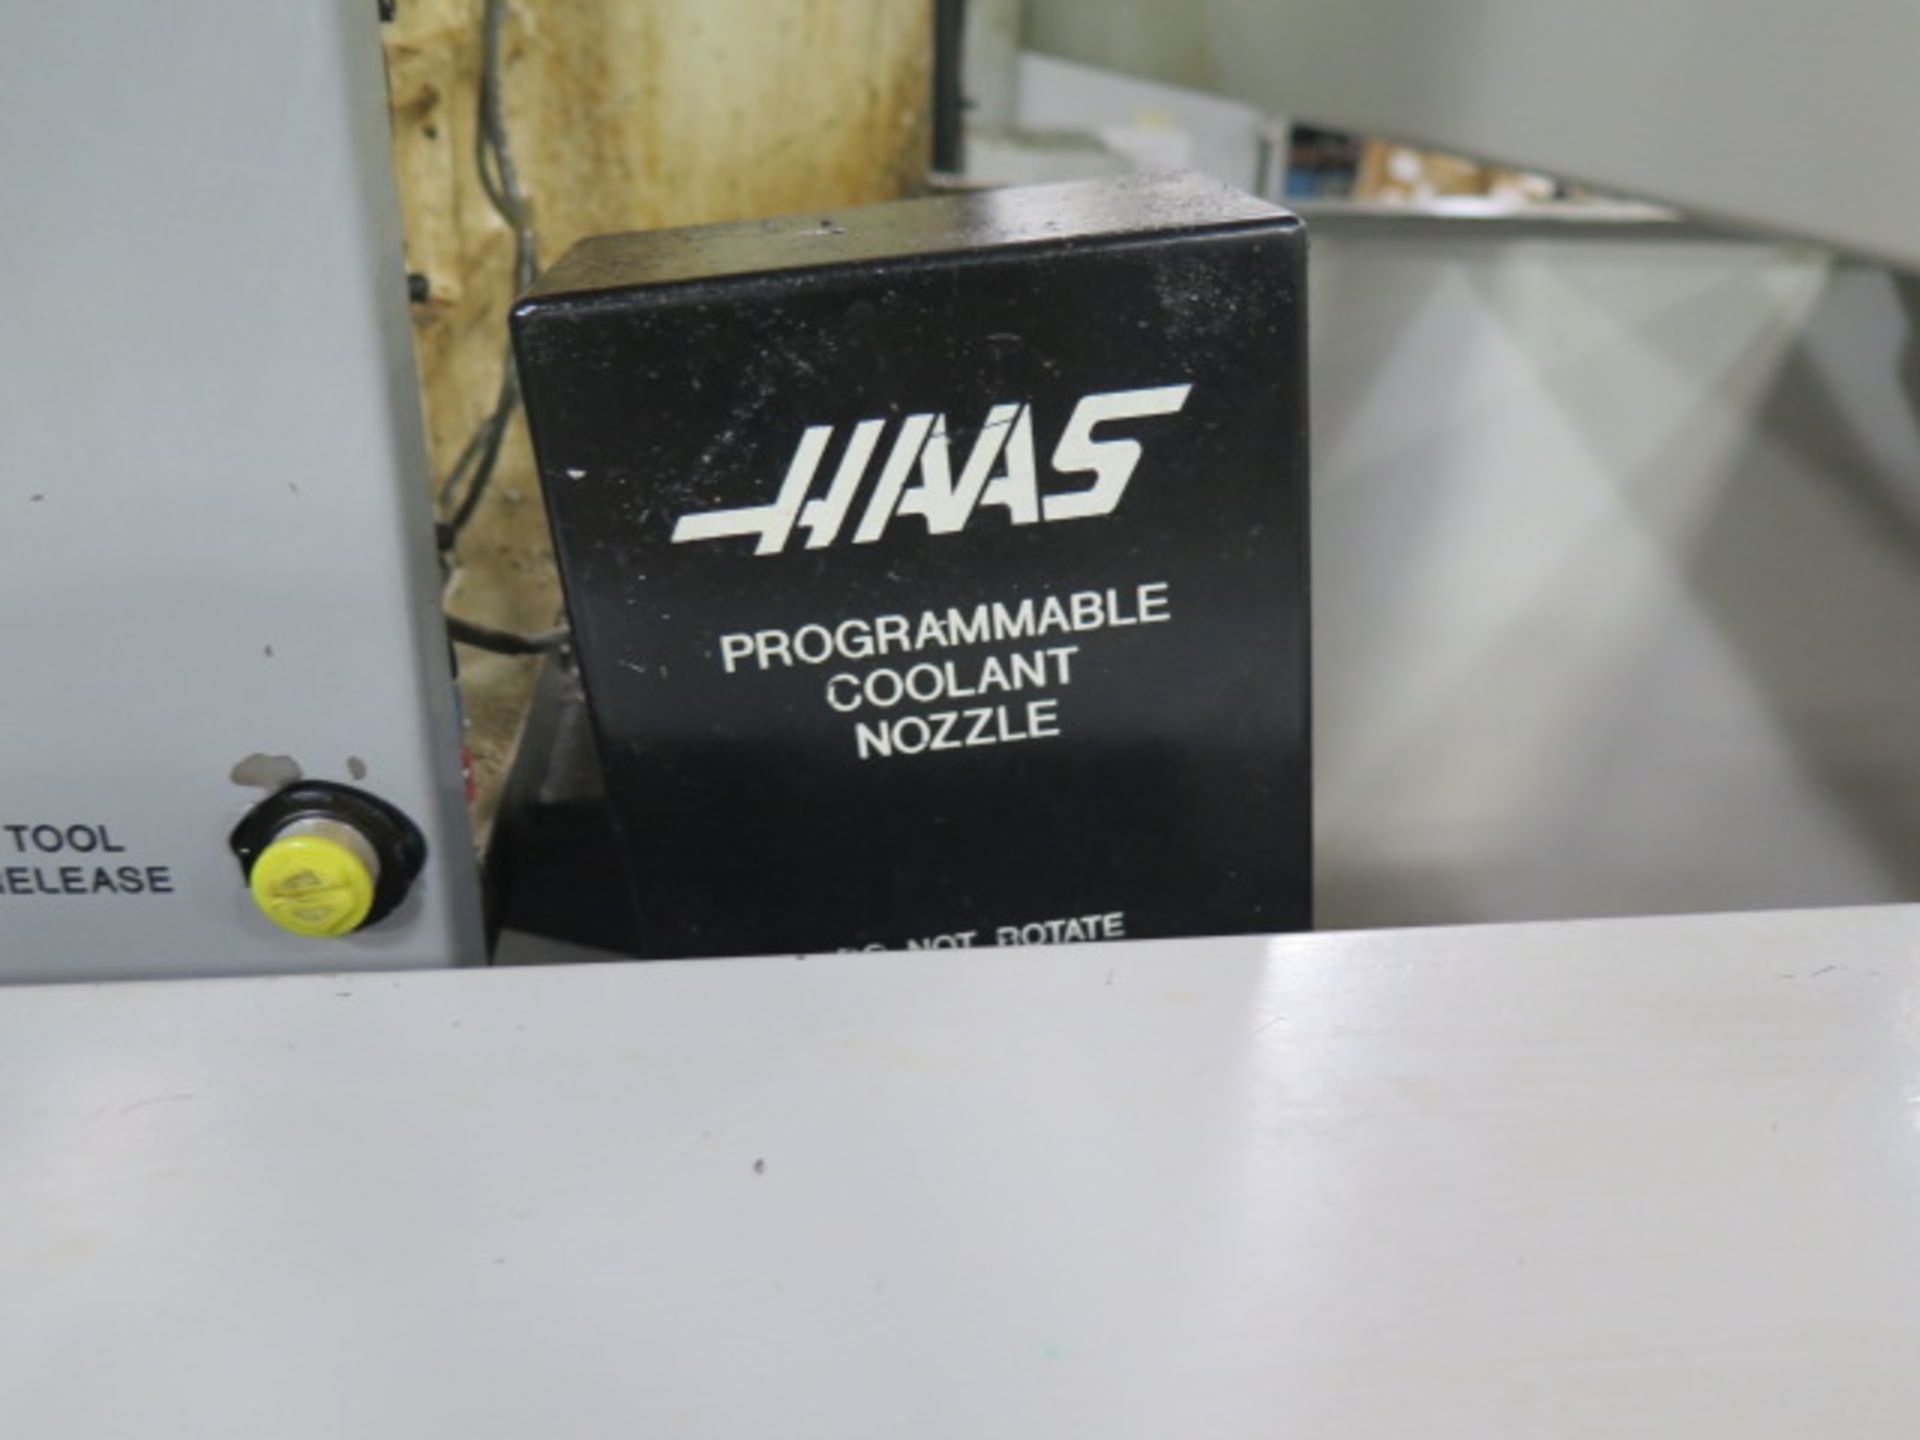 1997 Haas VF-3 4-Axis CNC Vertical Machining Center s/n 10187 w/ Haas Controls, 20-Station ATC, BT- - Image 9 of 17